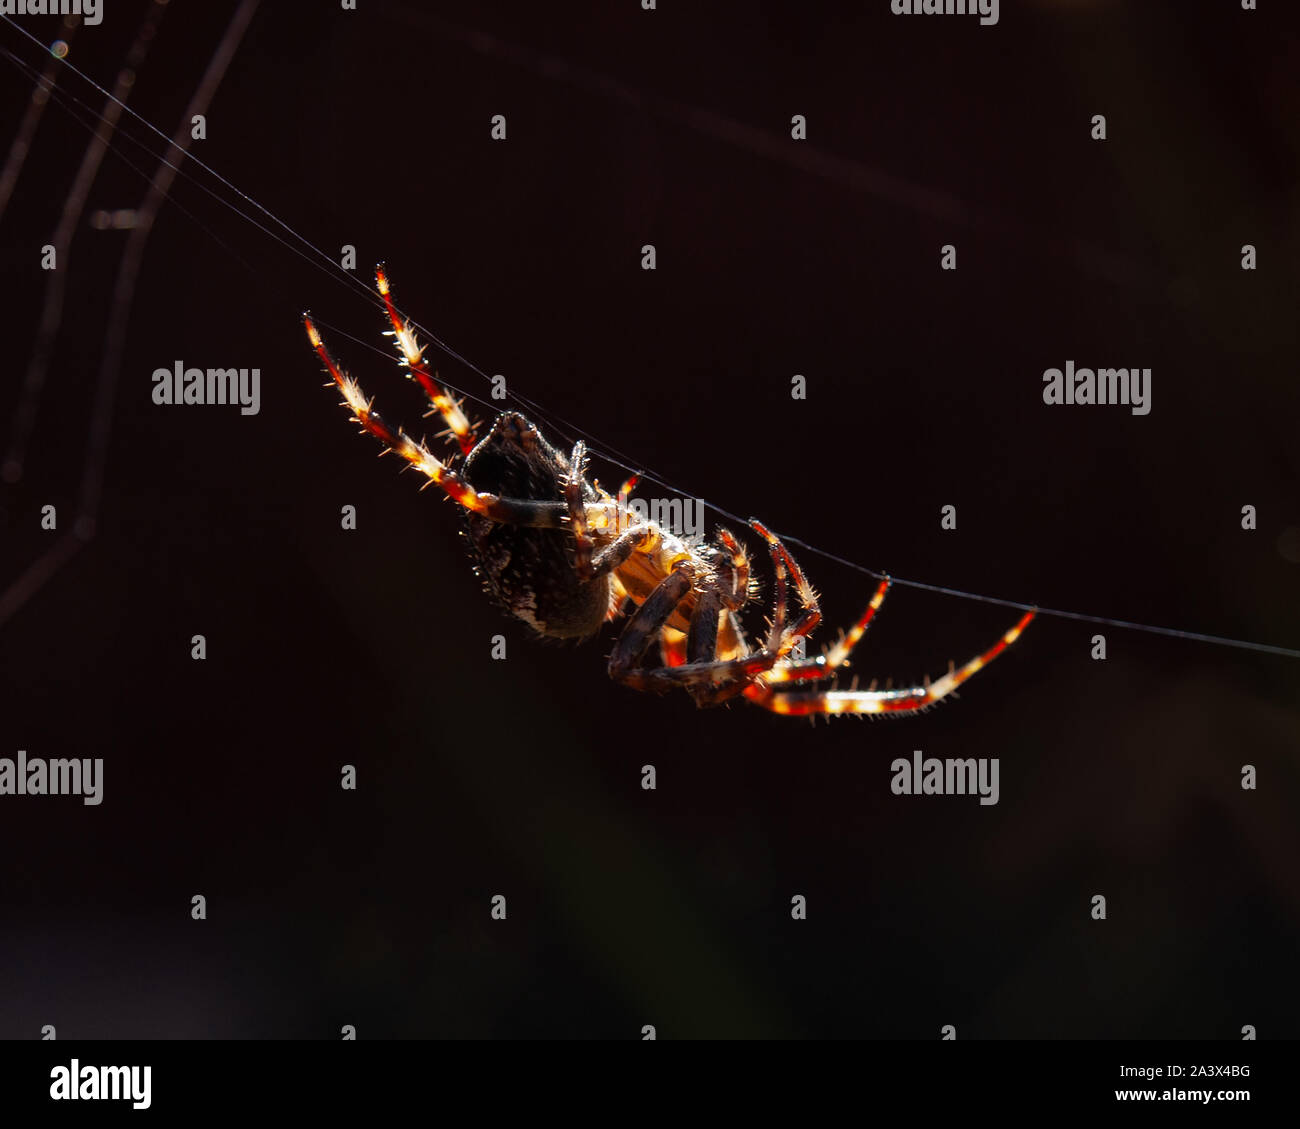 Garden spider hanging by a thread in the sunlight with its web in the background. Silk can be seen coming from its spinnerets. Stock Photo